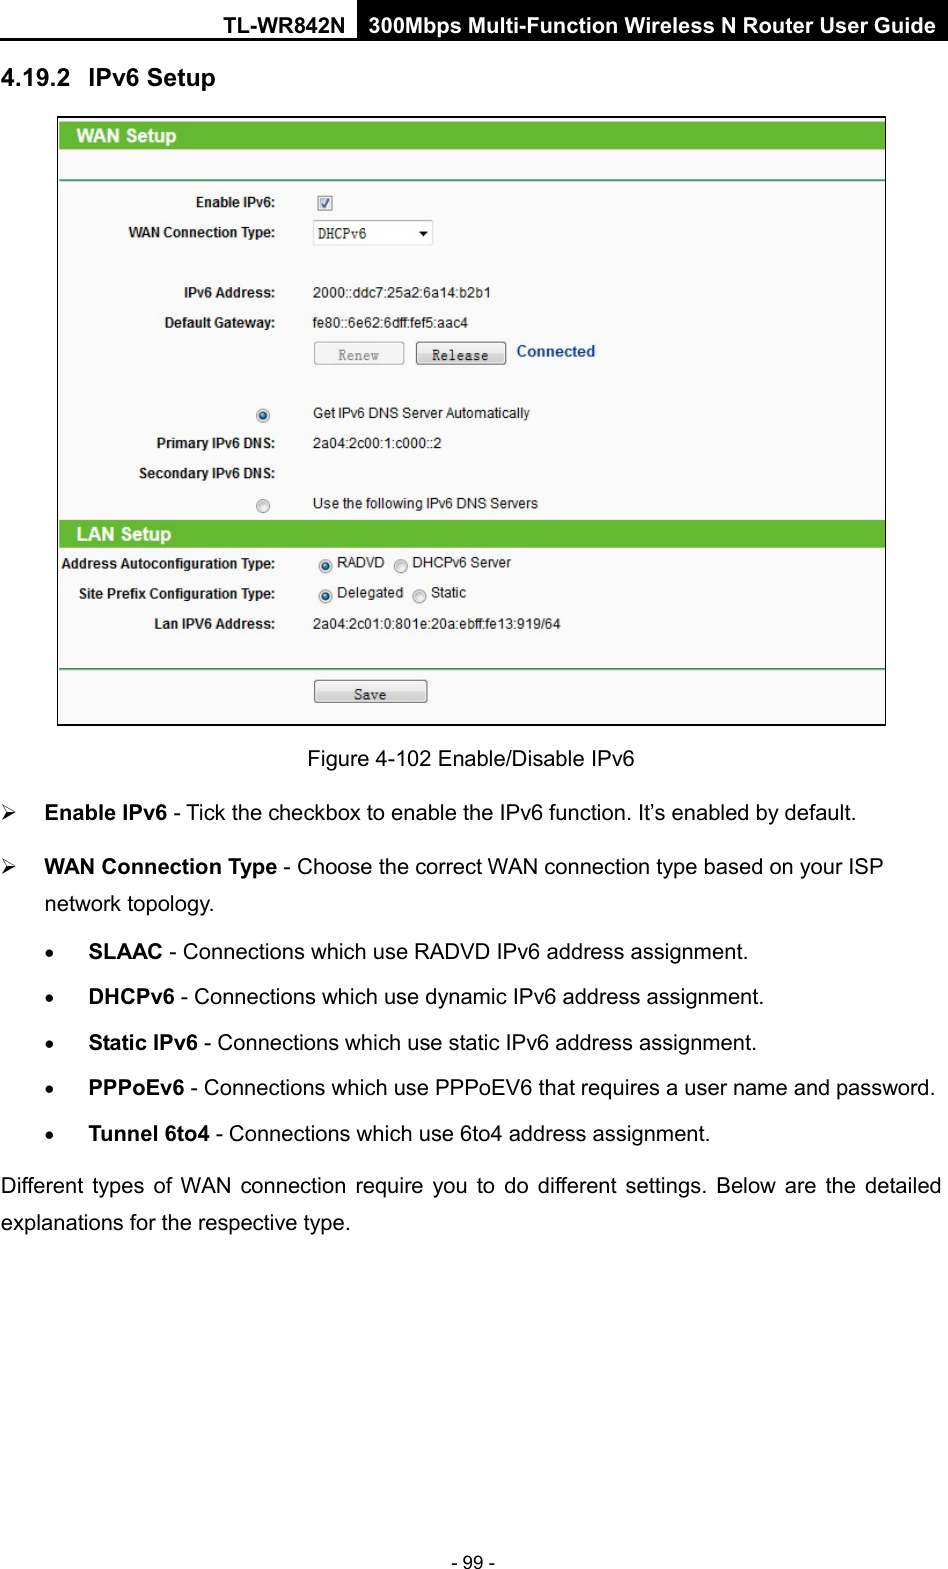 TL-WR842N 300Mbps Multi-Function Wireless N Router User Guide  - 99 - 4.19.2 IPv6 Setup  Figure 4-102 Enable/Disable IPv6  Enable IPv6 - Tick the checkbox to enable the IPv6 function. It’s enabled by default.  WAN Connection Type - Choose the correct WAN connection type based on your ISP network topology. • SLAAC - Connections which use RADVD IPv6 address assignment. • DHCPv6 - Connections which use dynamic IPv6 address assignment.   • Static IPv6 - Connections which use static IPv6 address assignment.   • PPPoEv6 - Connections which use PPPoEV6 that requires a user name and password.   • Tunnel 6to4 - Connections which use 6to4 address assignment. Different types of WAN connection require you to do different settings. Below are the detailed explanations for the respective type. 